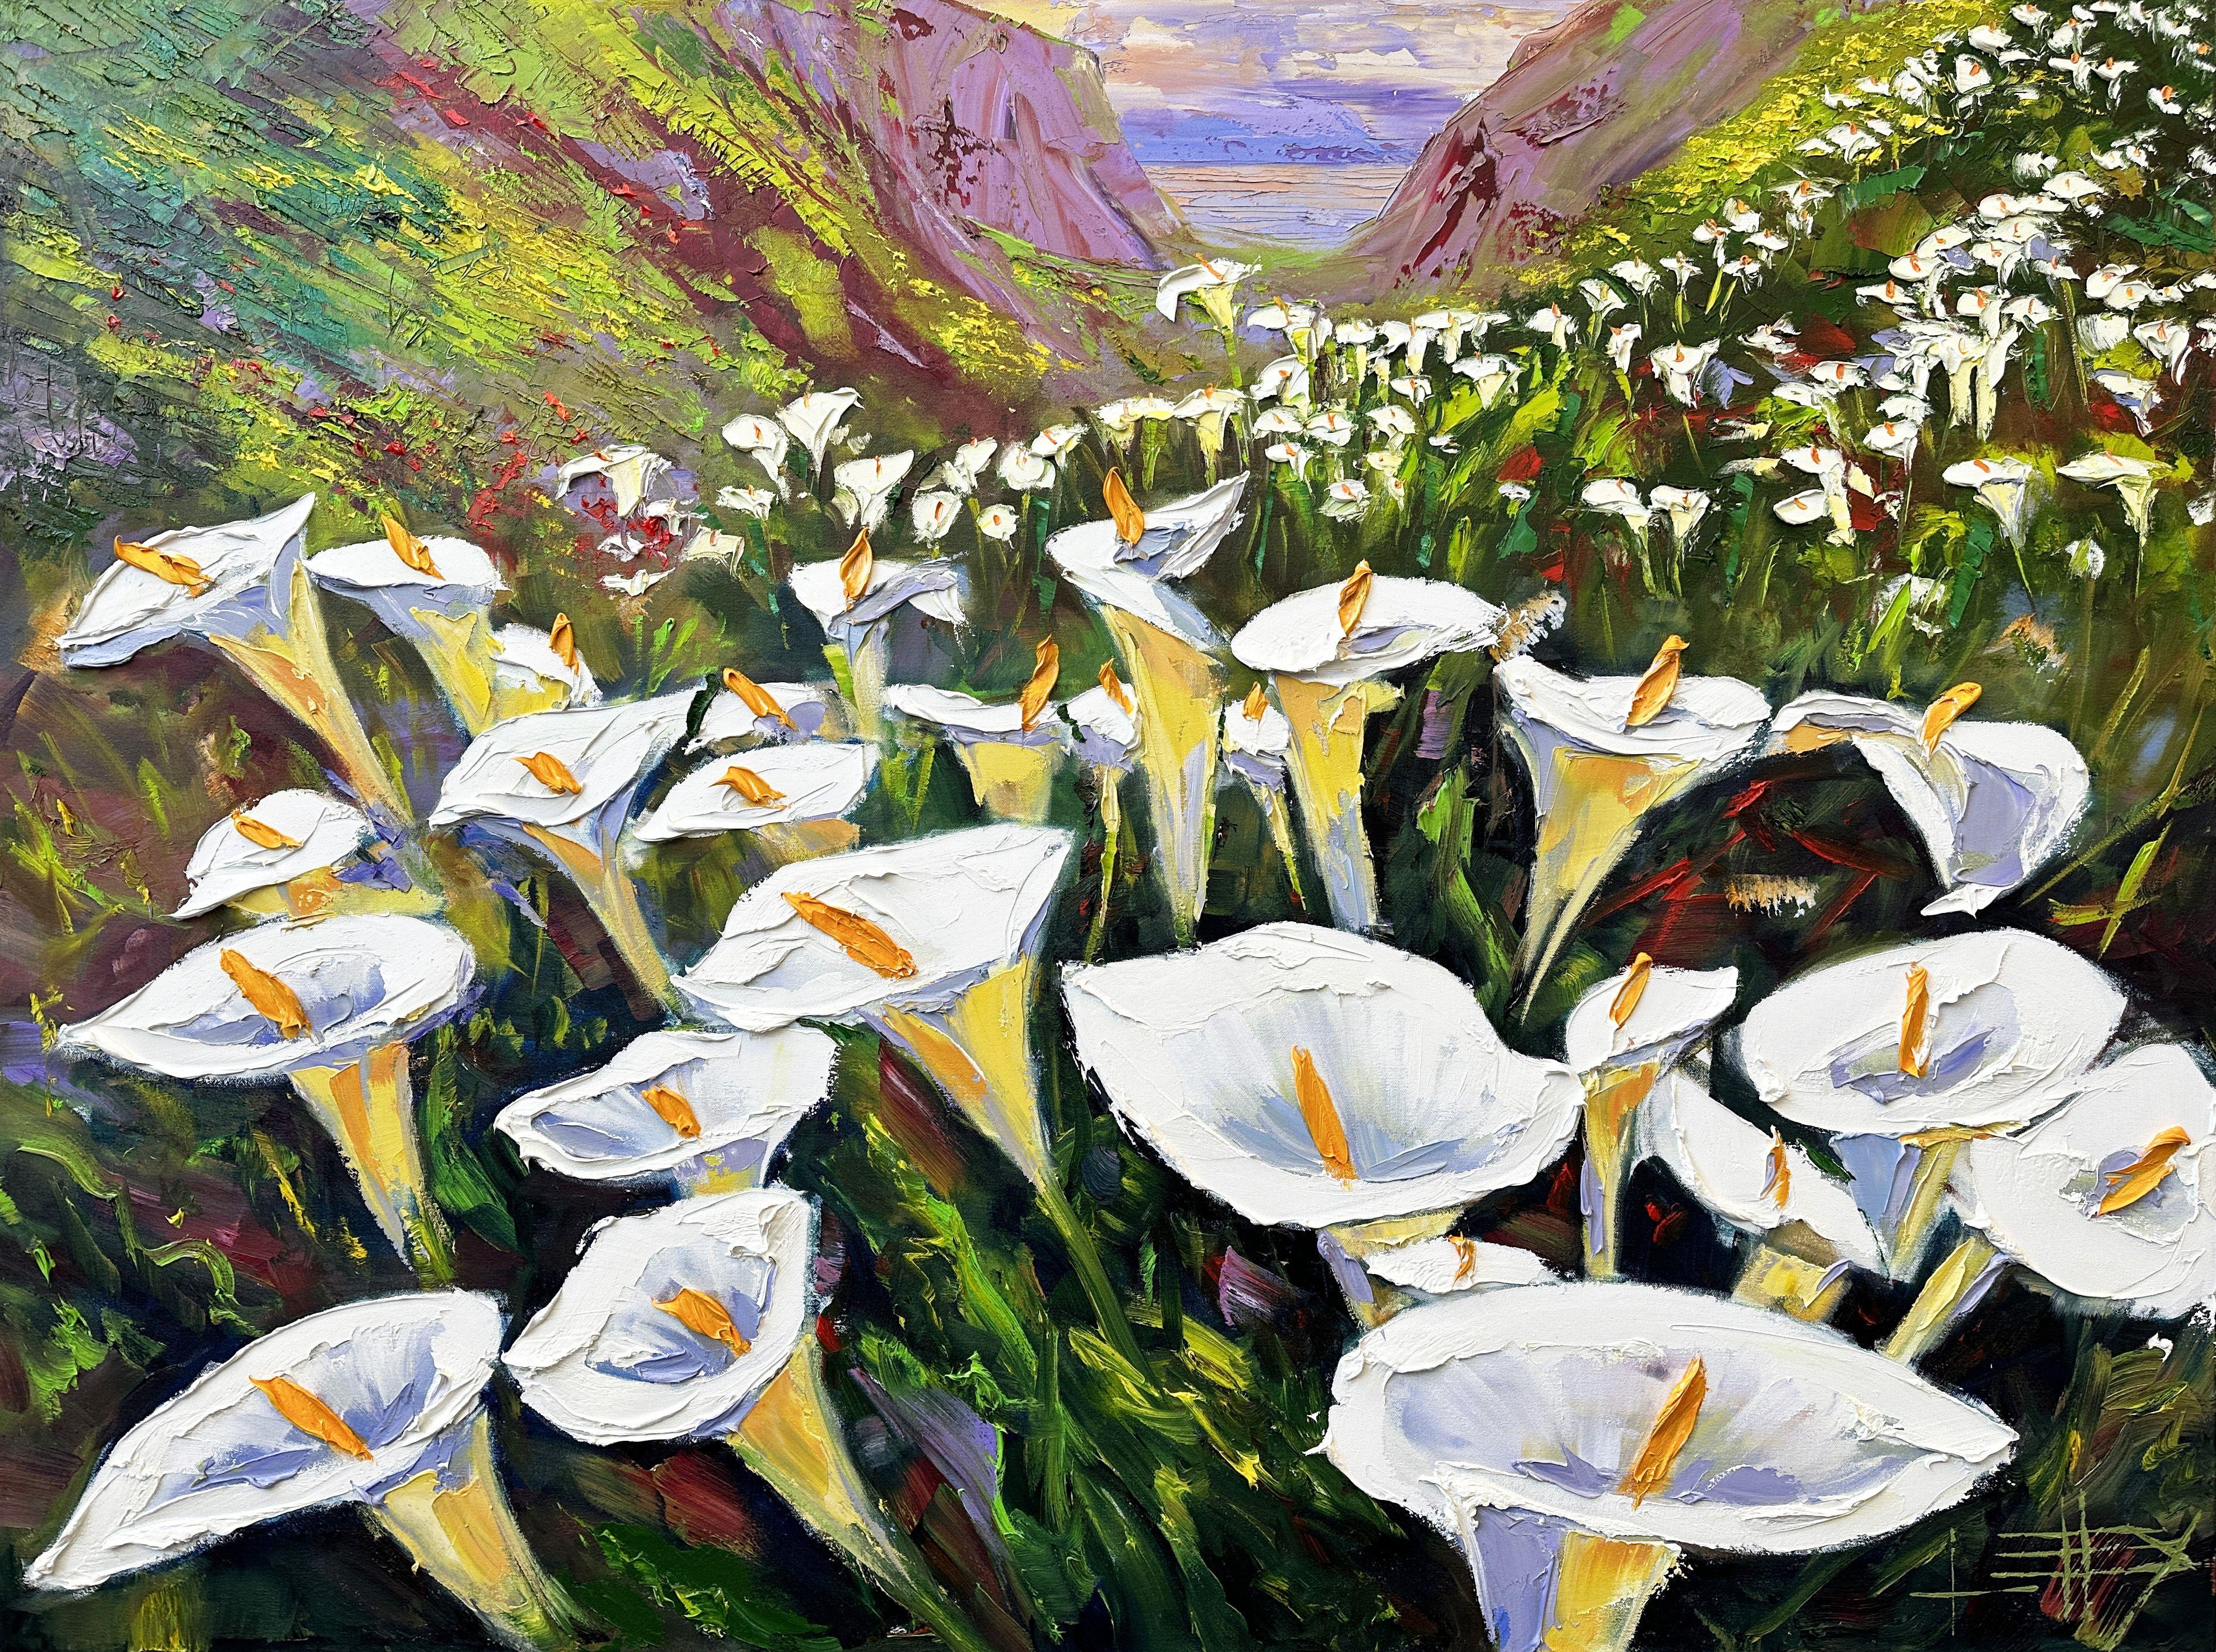 "Lily Serenade" finds its muse in the awe-inspiring Cala Lily Valley nestled within the breathtaking landscapes of Big Sur, California. Here, a valley adorned with vibrant lilies gracefully merges with the expansive Pacific Ocean. Lisa, deeply moved